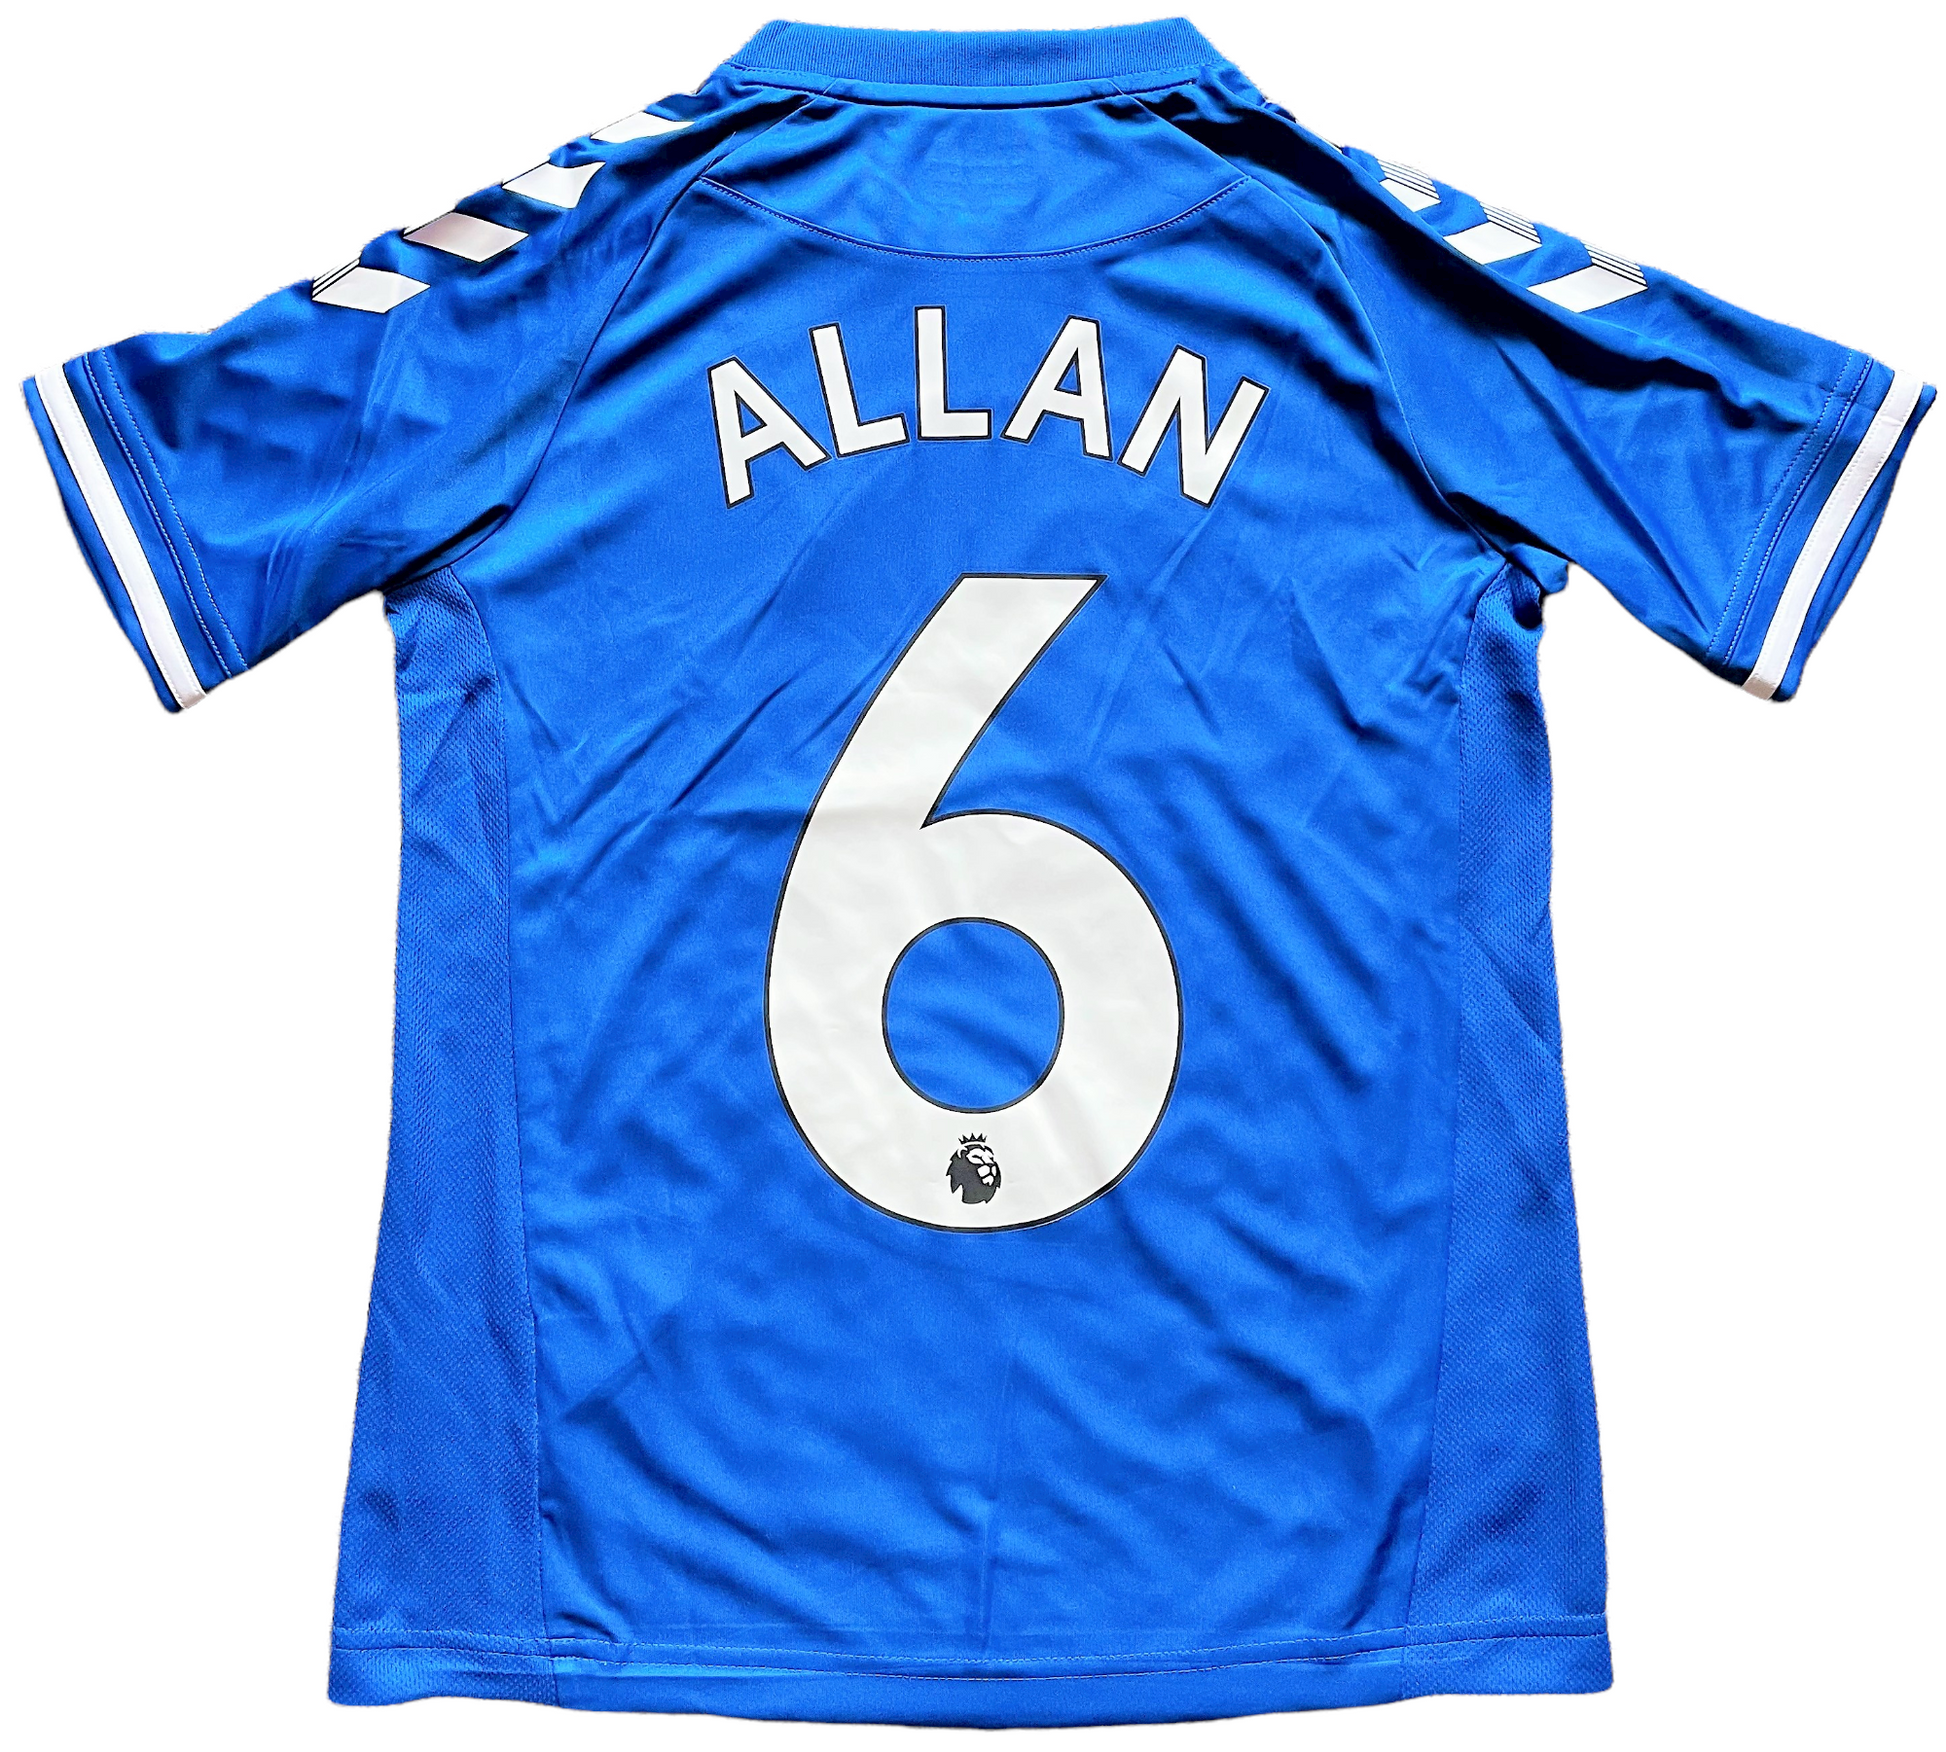 2020-21 Everton Home Shirt ALLAN #6 (excellent) Youths XLarge